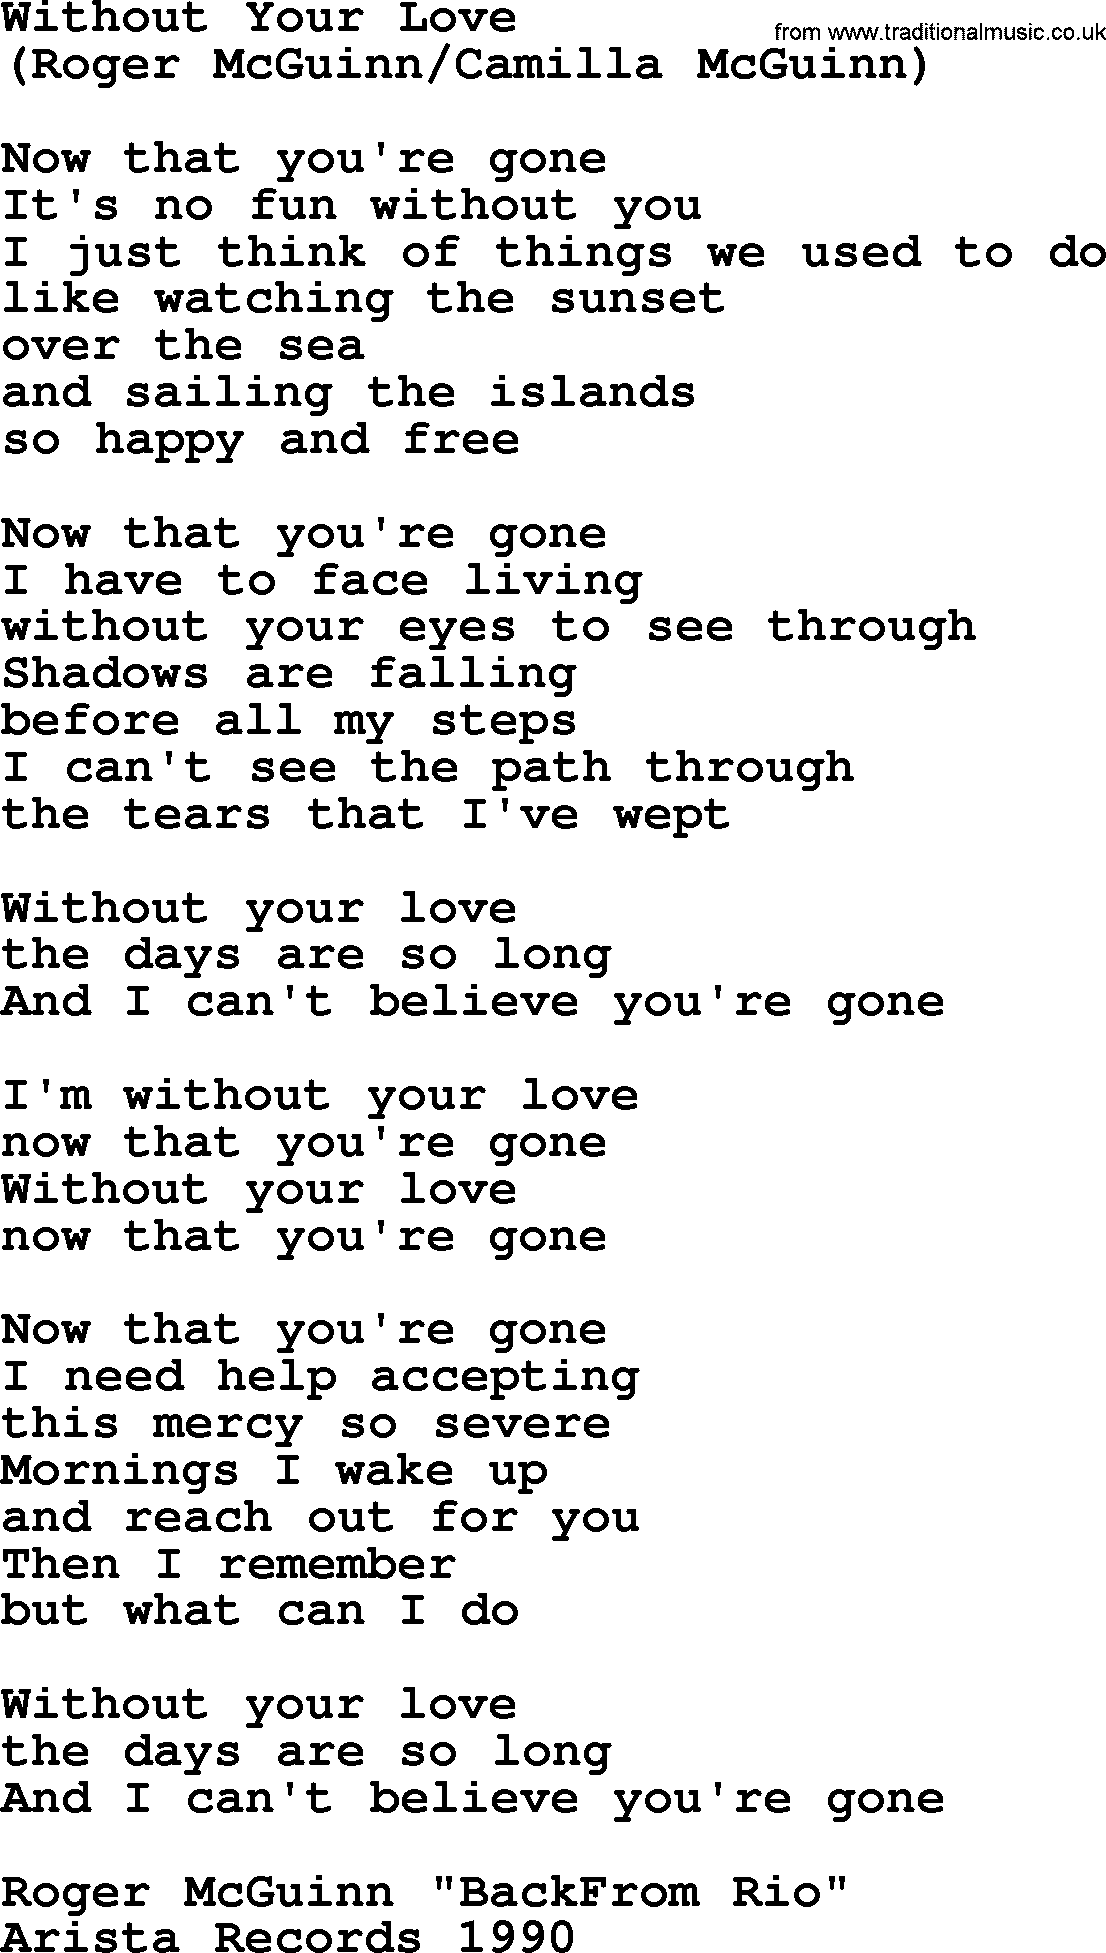 Without Your Love, by The Byrds - lyrics with pdf